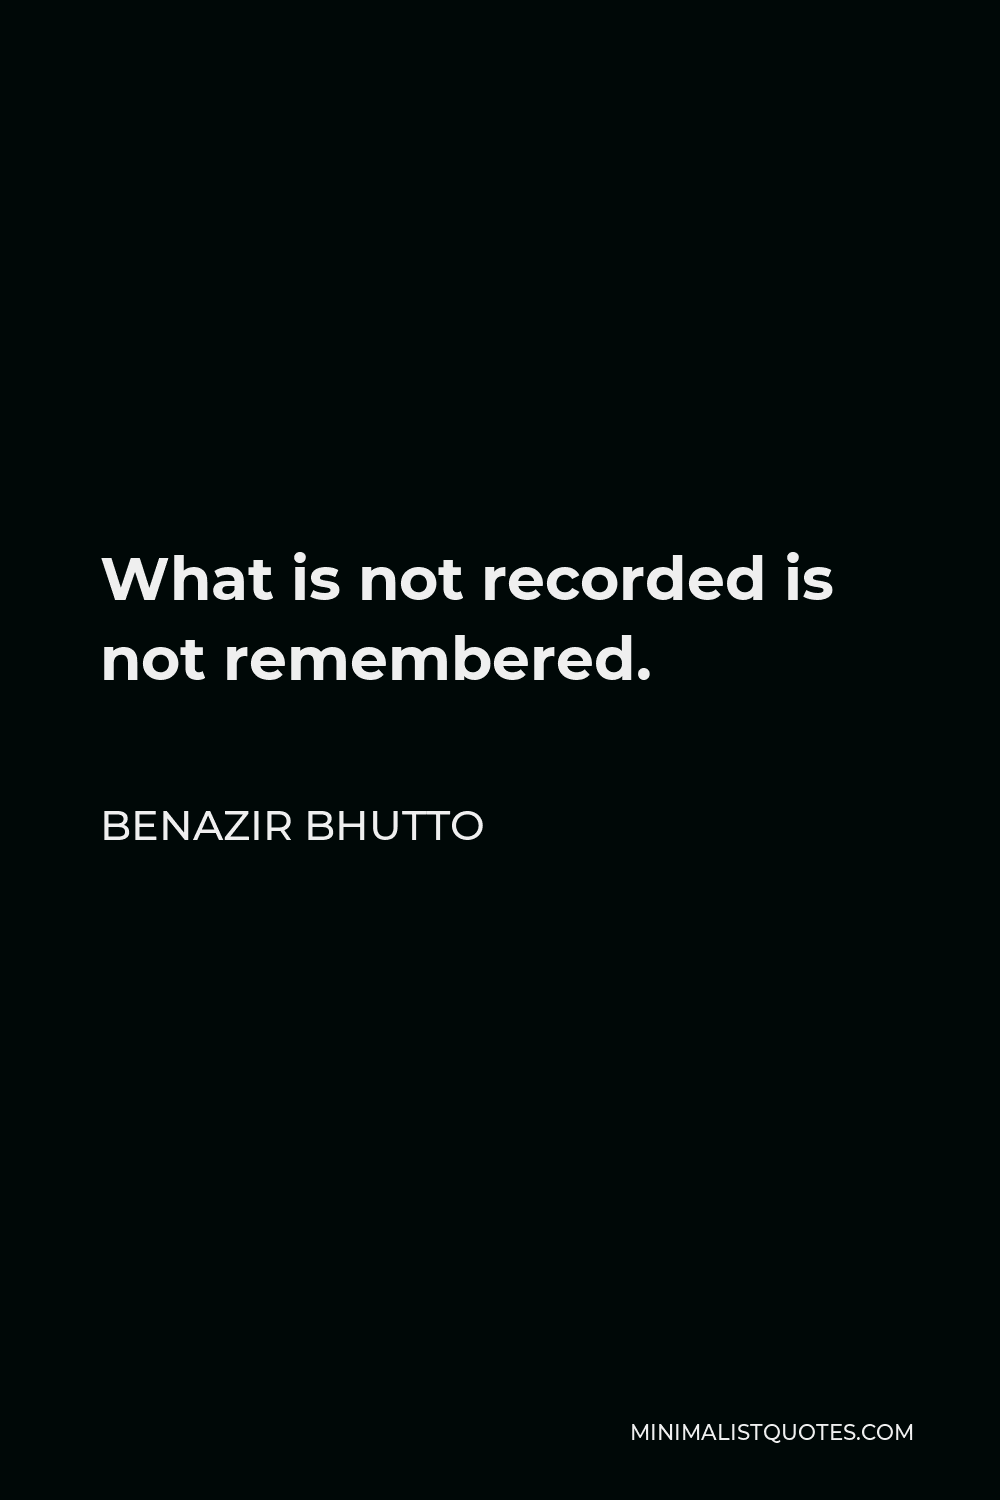 Benazir Bhutto Quote - What is not recorded is not remembered.